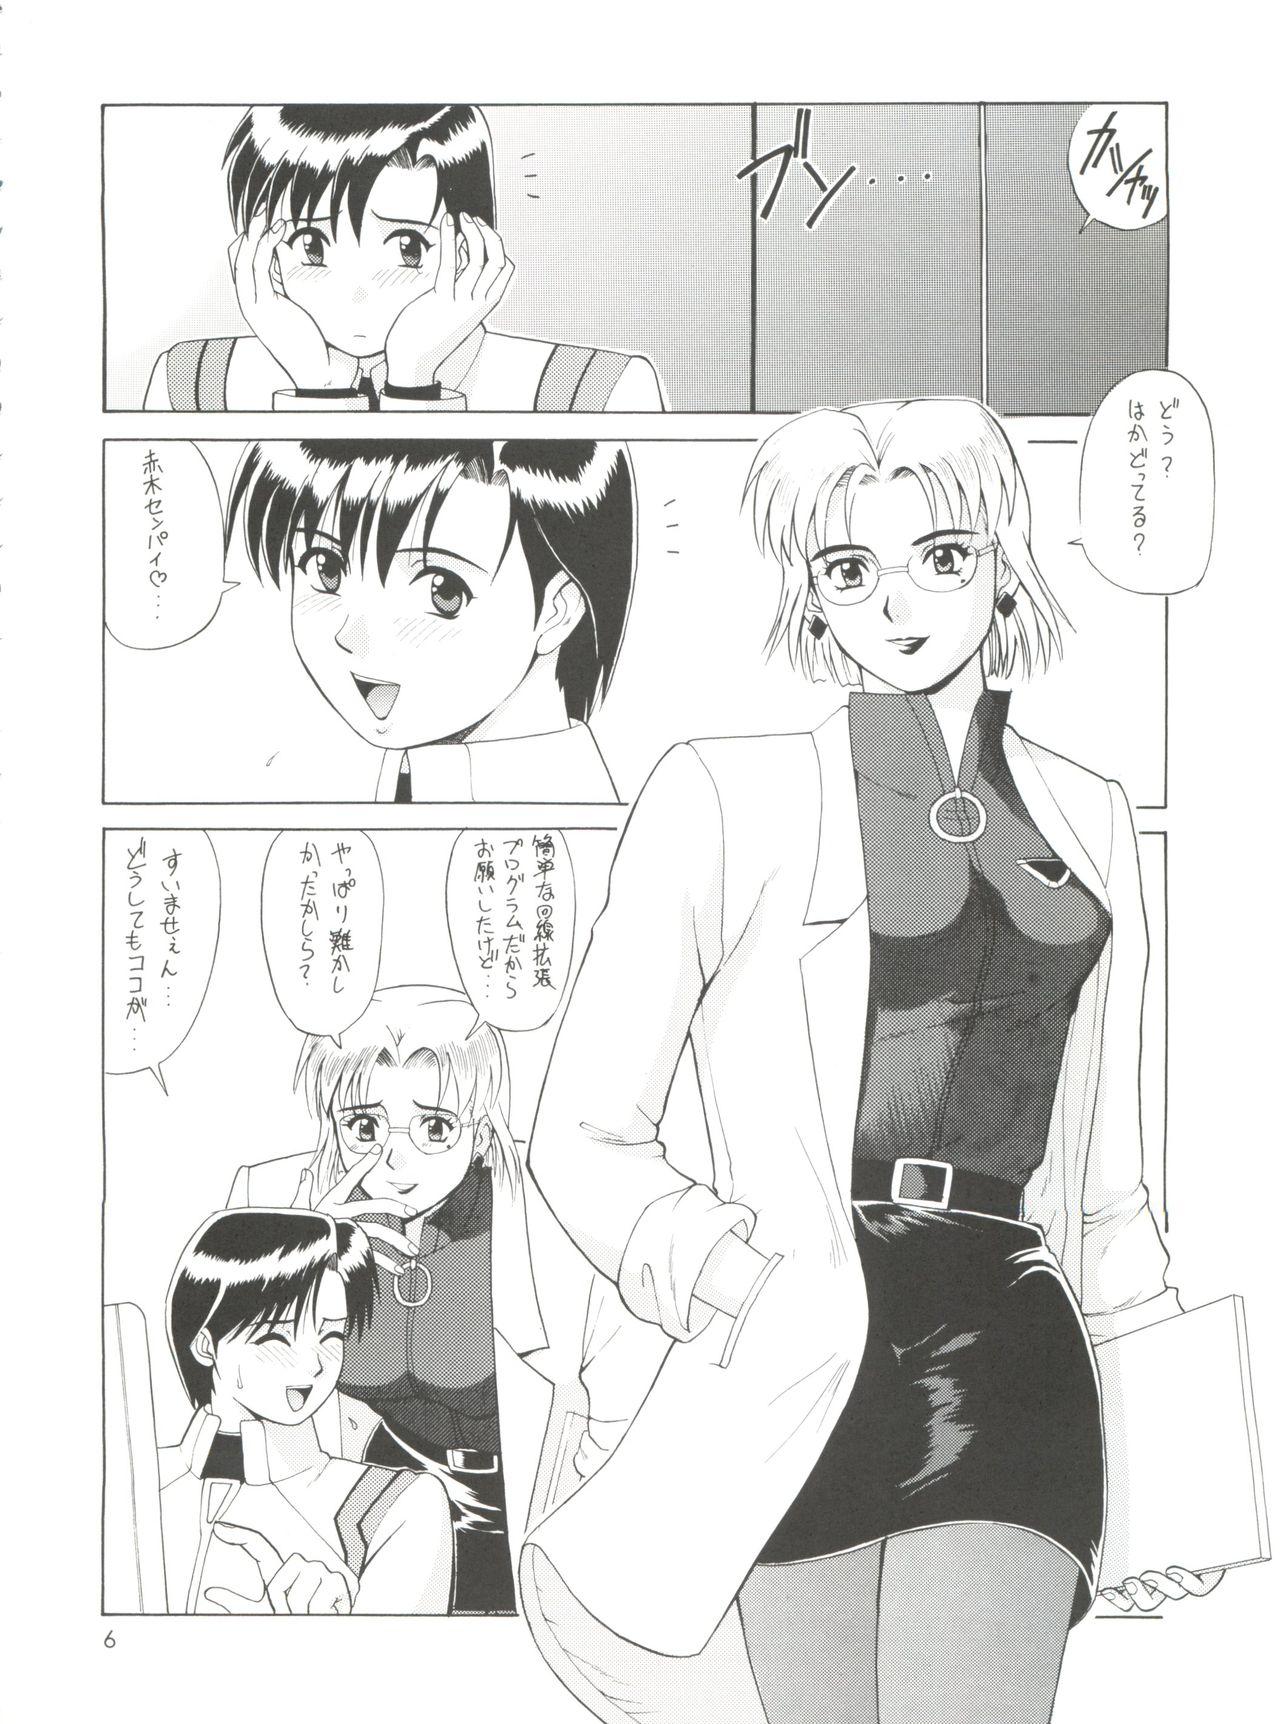 Playing Suite For My Sweet Shinteiban - Neon genesis evangelion T Girl - Page 5